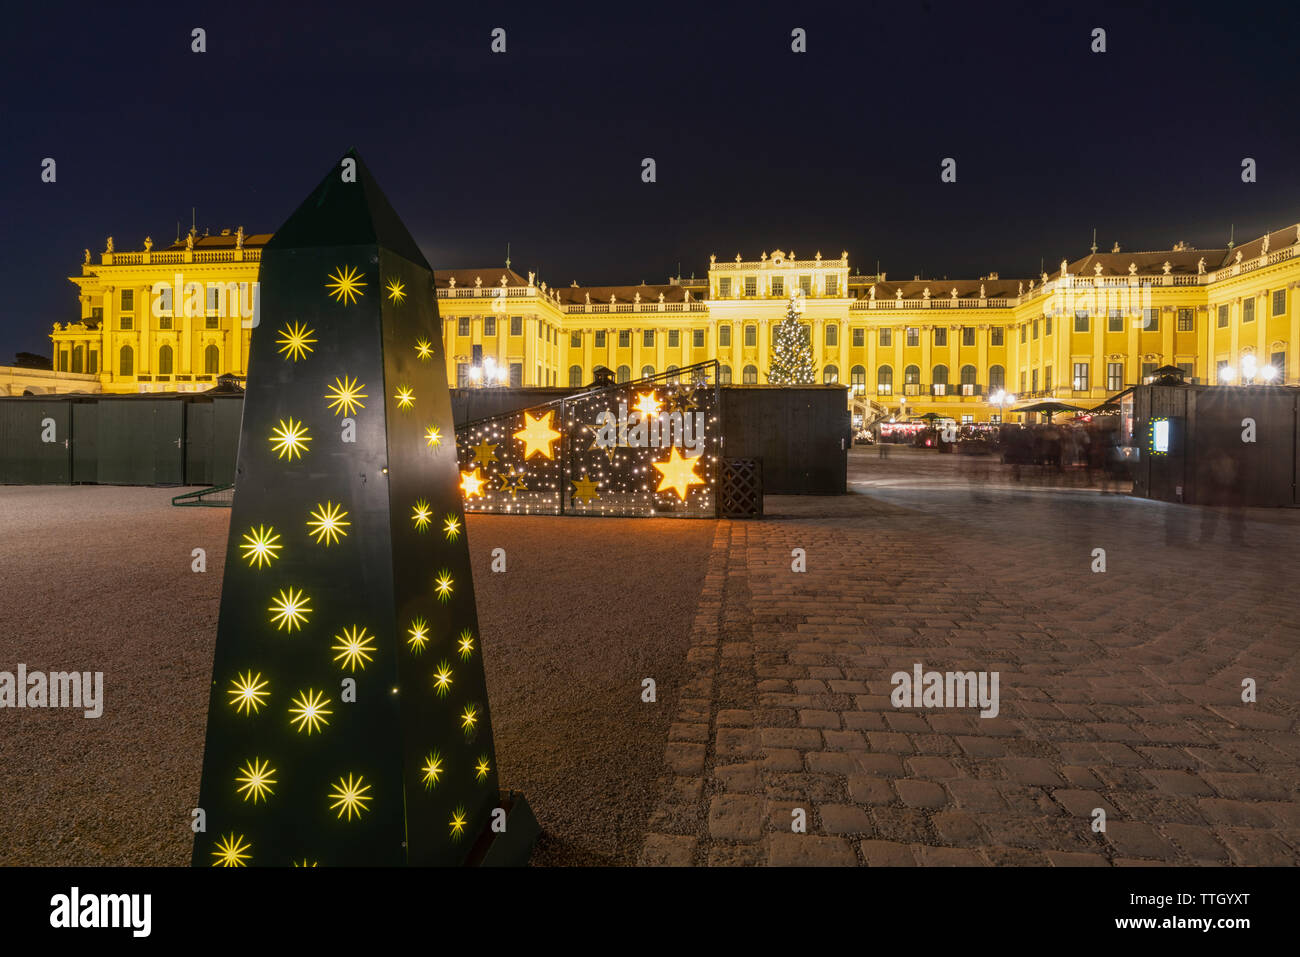 Schonbrunn Palace Winter High Resolution Stock Photography and Images